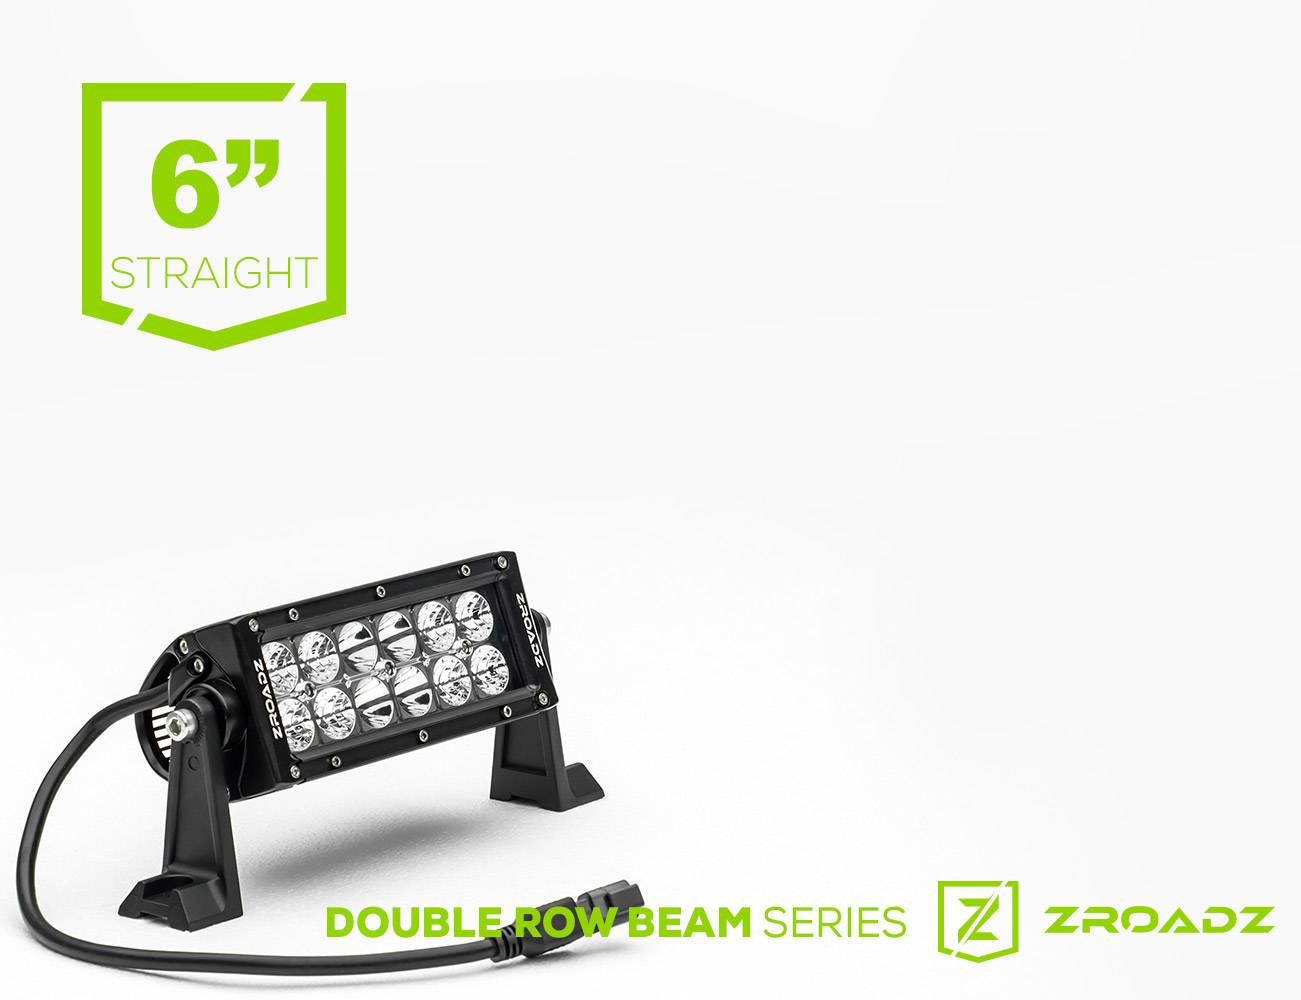 ZROADZ OFF ROAD PRODUCTS - 6 Inch LED Straight Double Row Light Bar - PN #Z30BC14W36